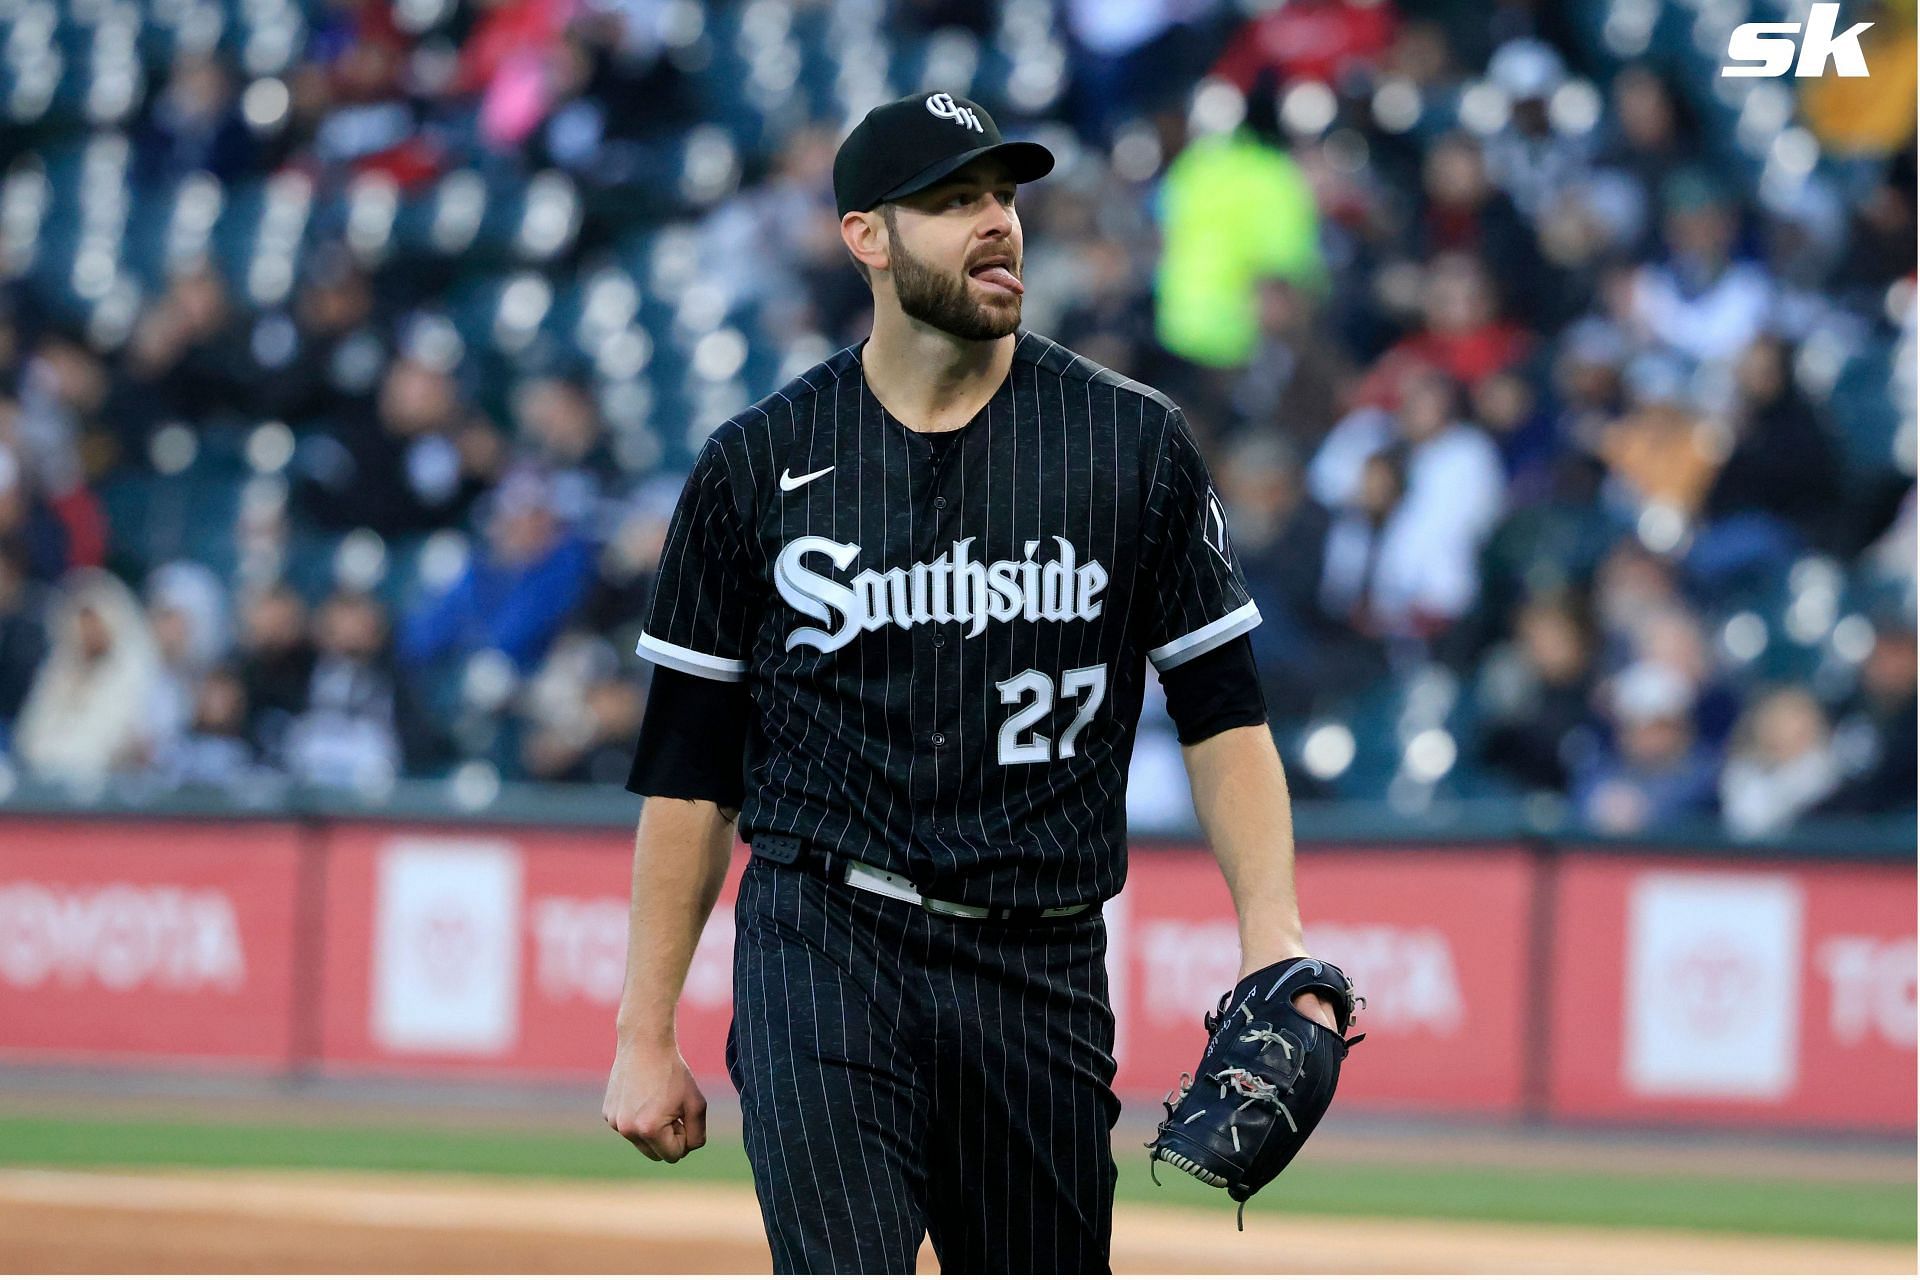 Lucas Giolito makes a bold statement